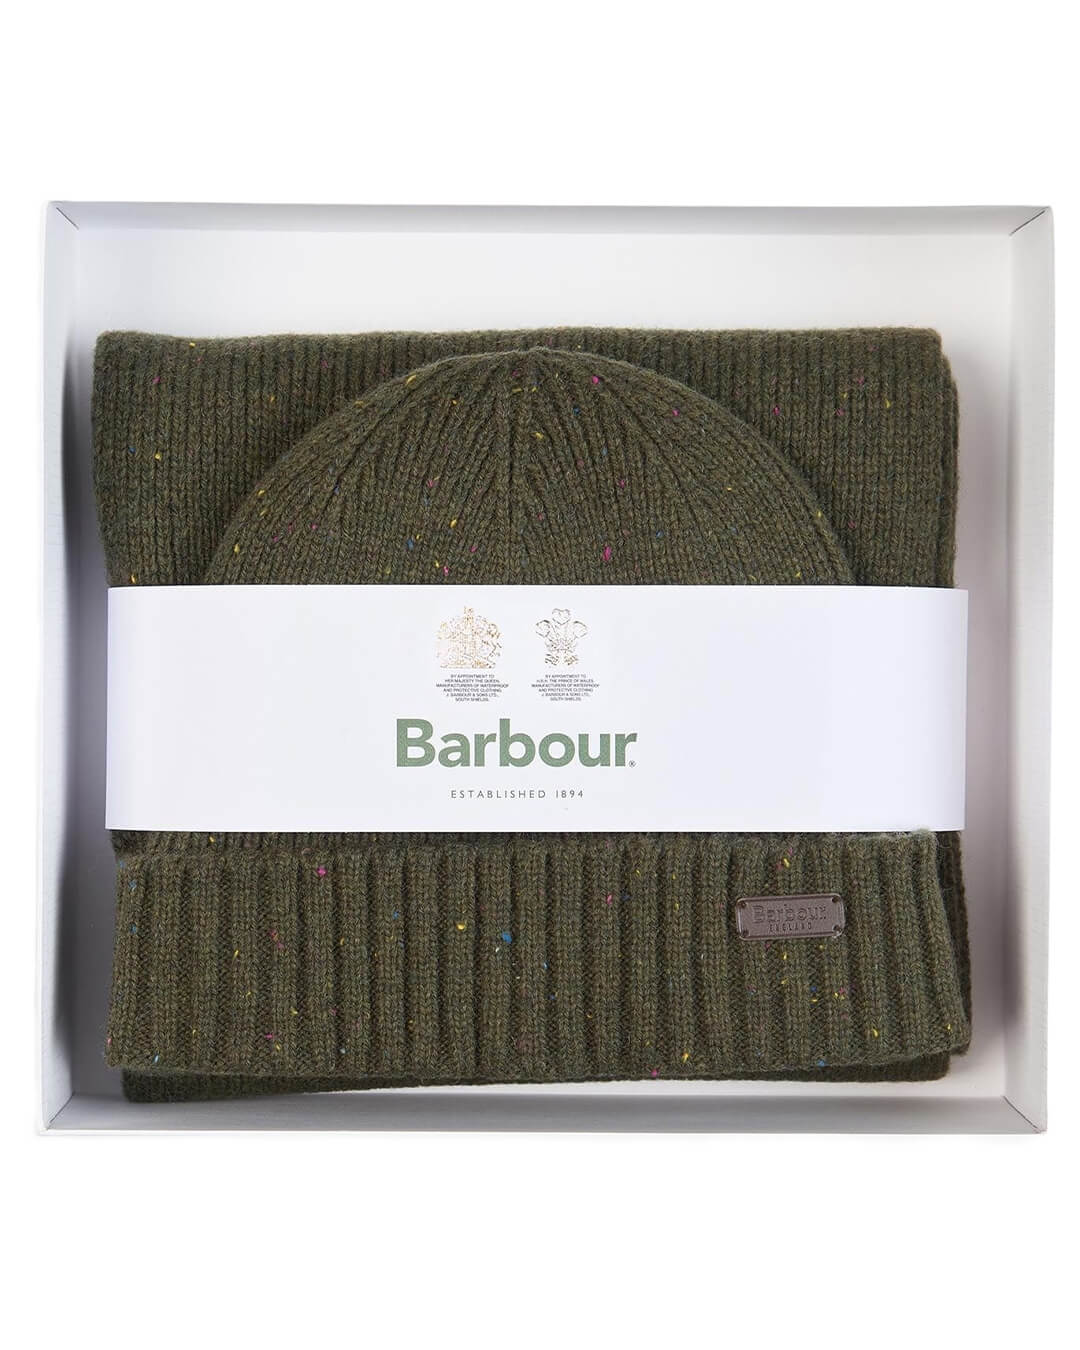 Barbour Gloves ONE Barbour Carlton Green Beanie Scarf Gift Set